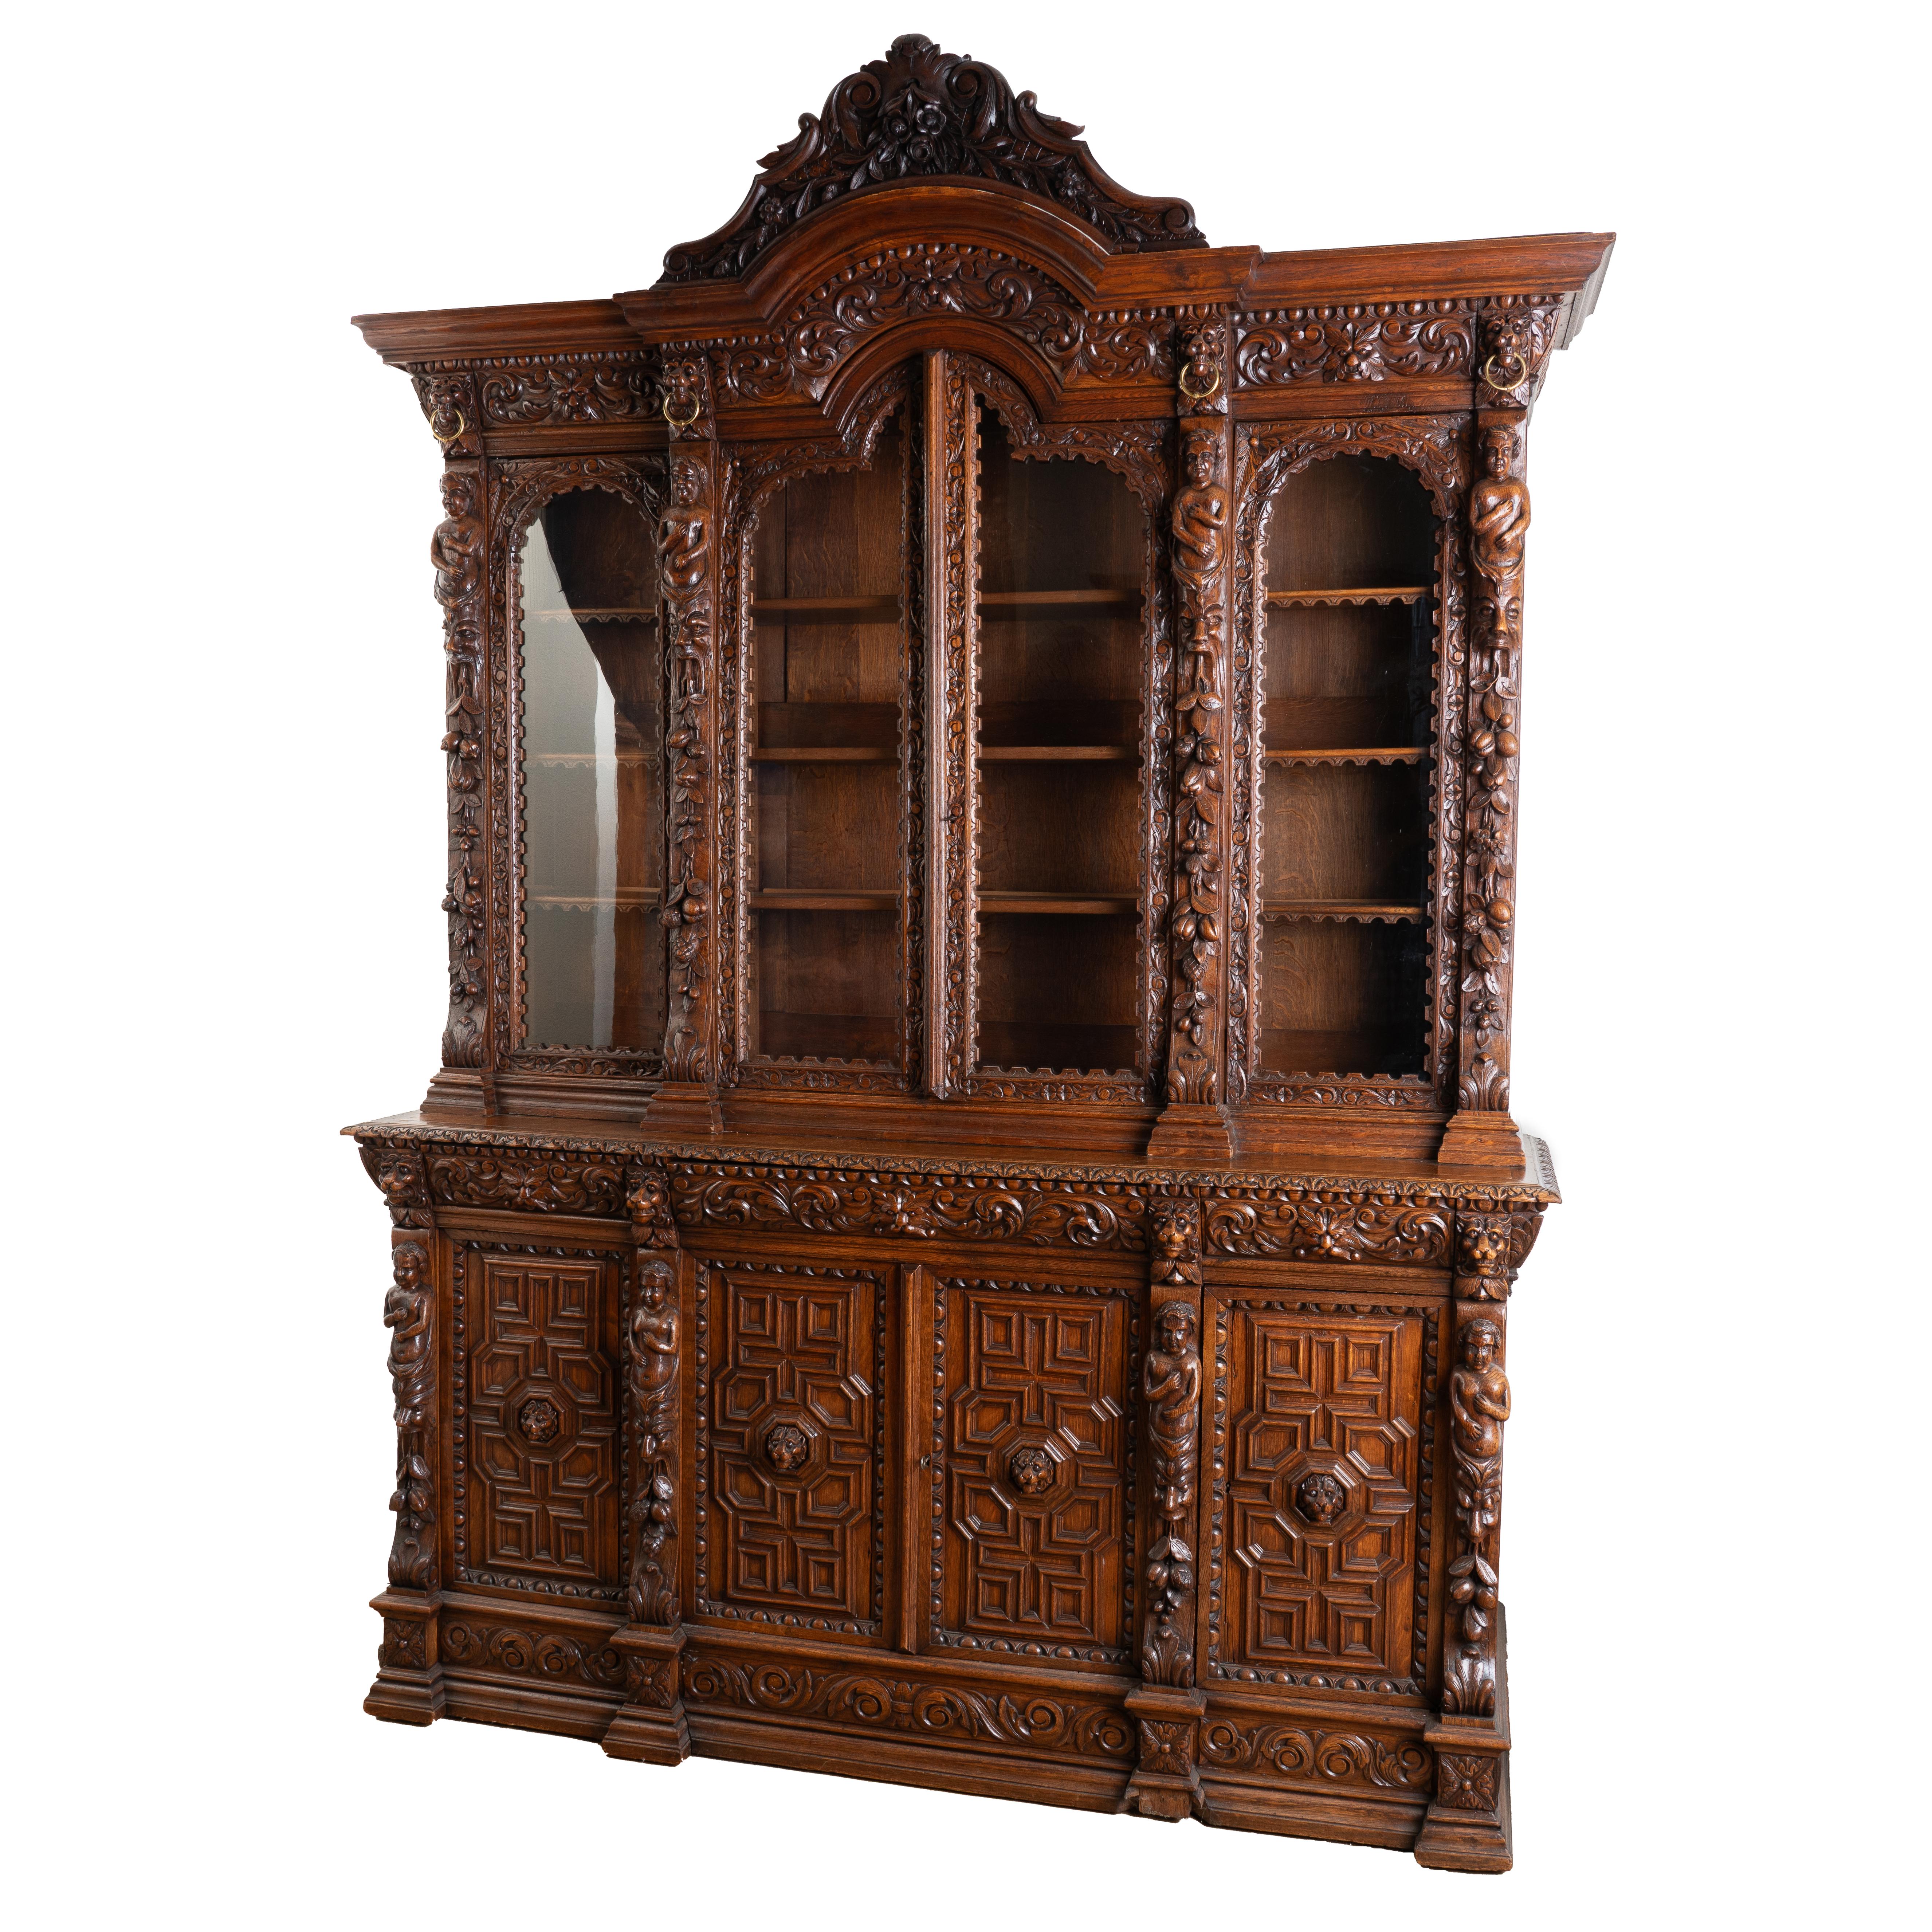 Impressive and statuesque, this extraordinary oak bookcase is embellished with a multitude of carved accents including figures, faces, lion heads, fruit, nuts, leaves and more.
The upper cabinet has 4 glass doors and adjustable shelving which allows